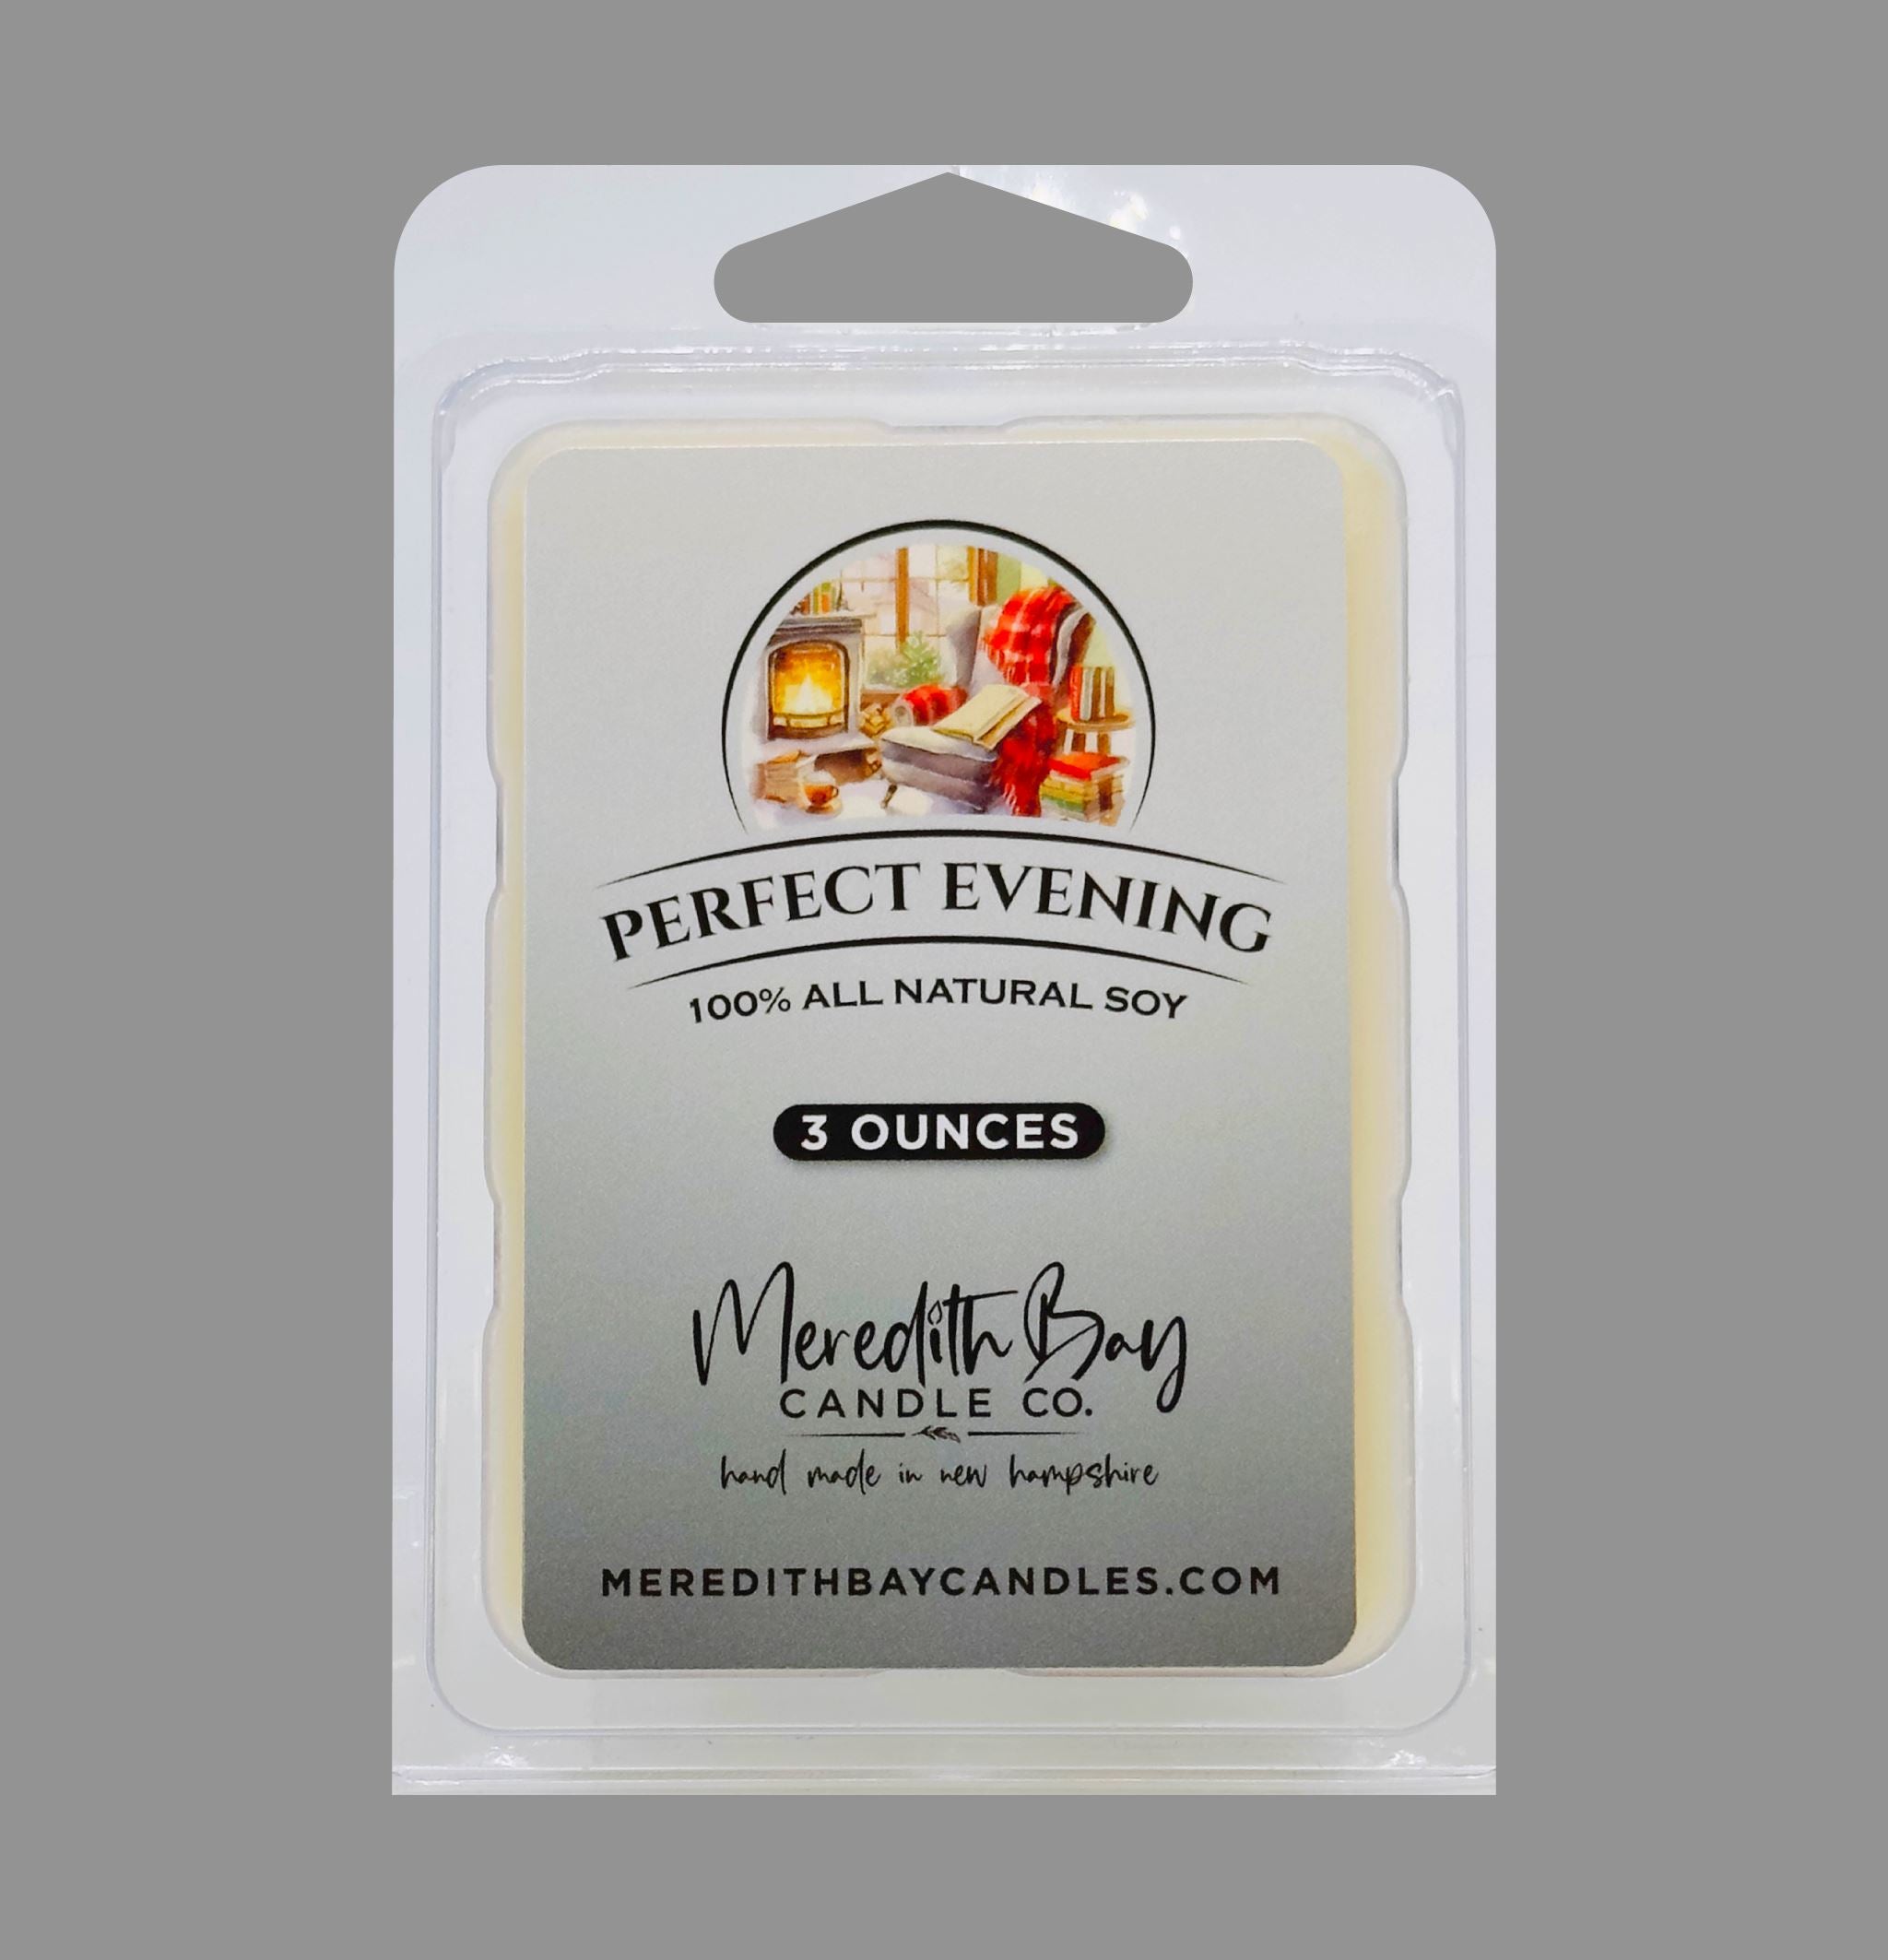 Perfect Evening Wax Melt Meredith Bay Candle Co 